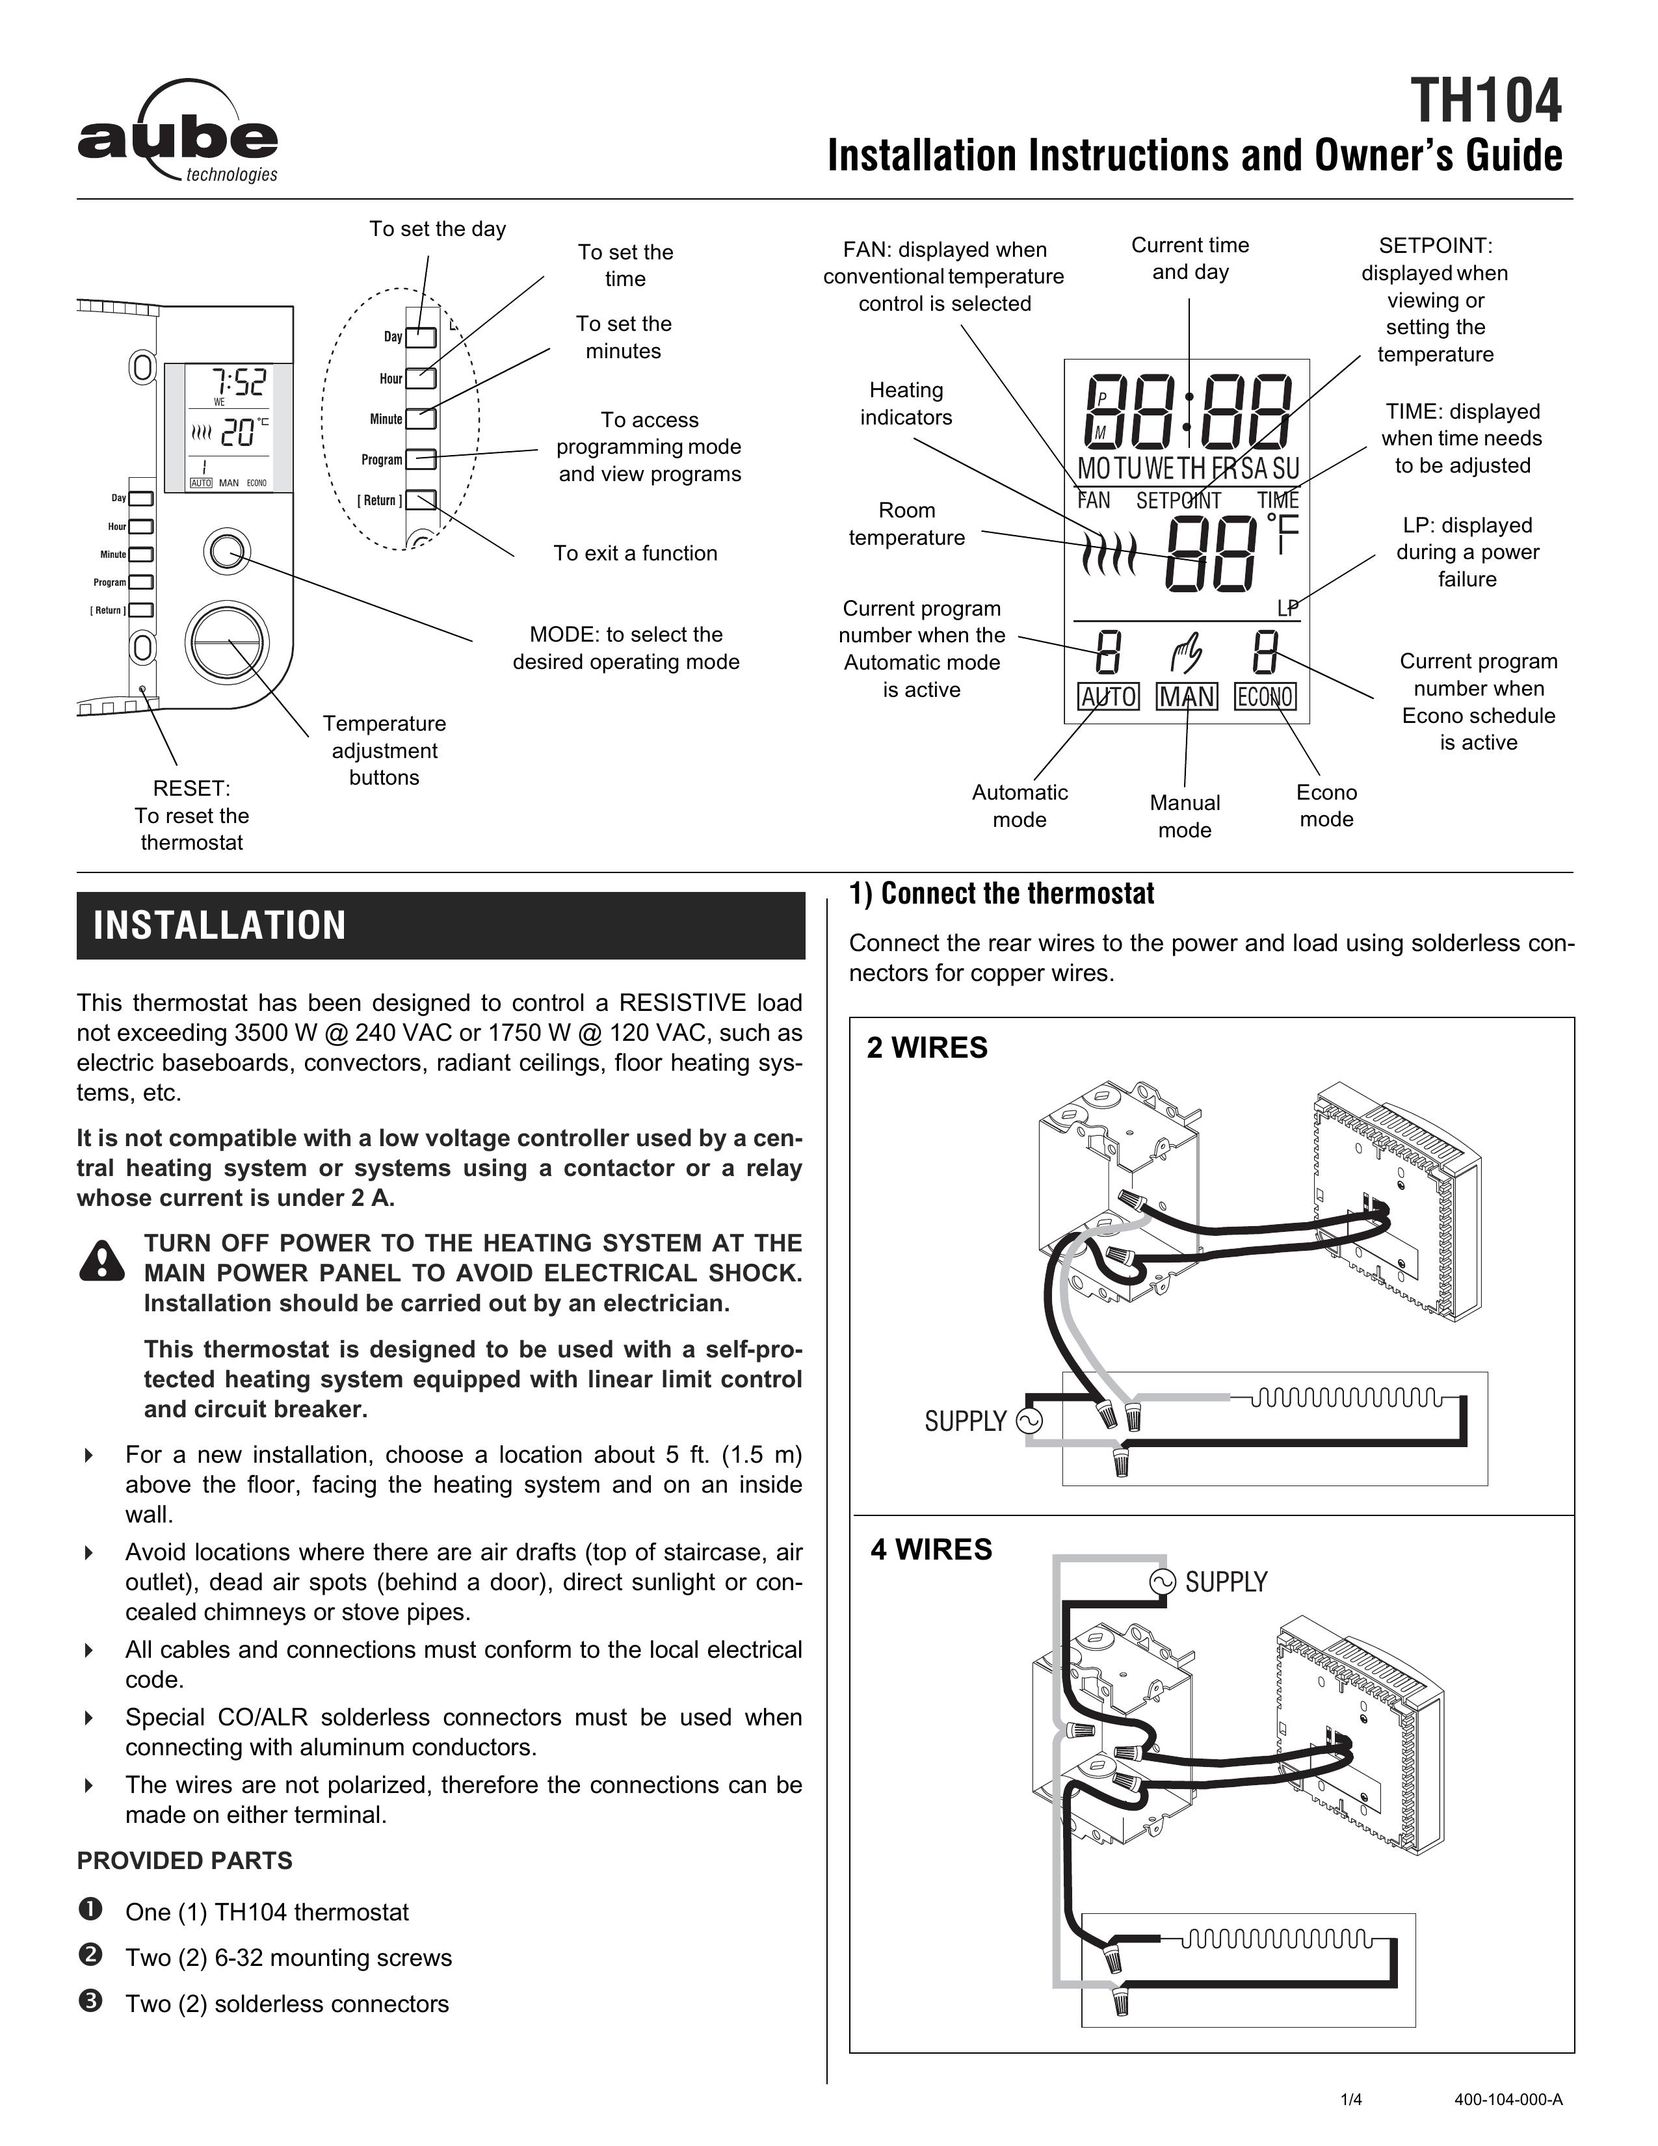 Aube Technologies TH104 Thermostat User Manual